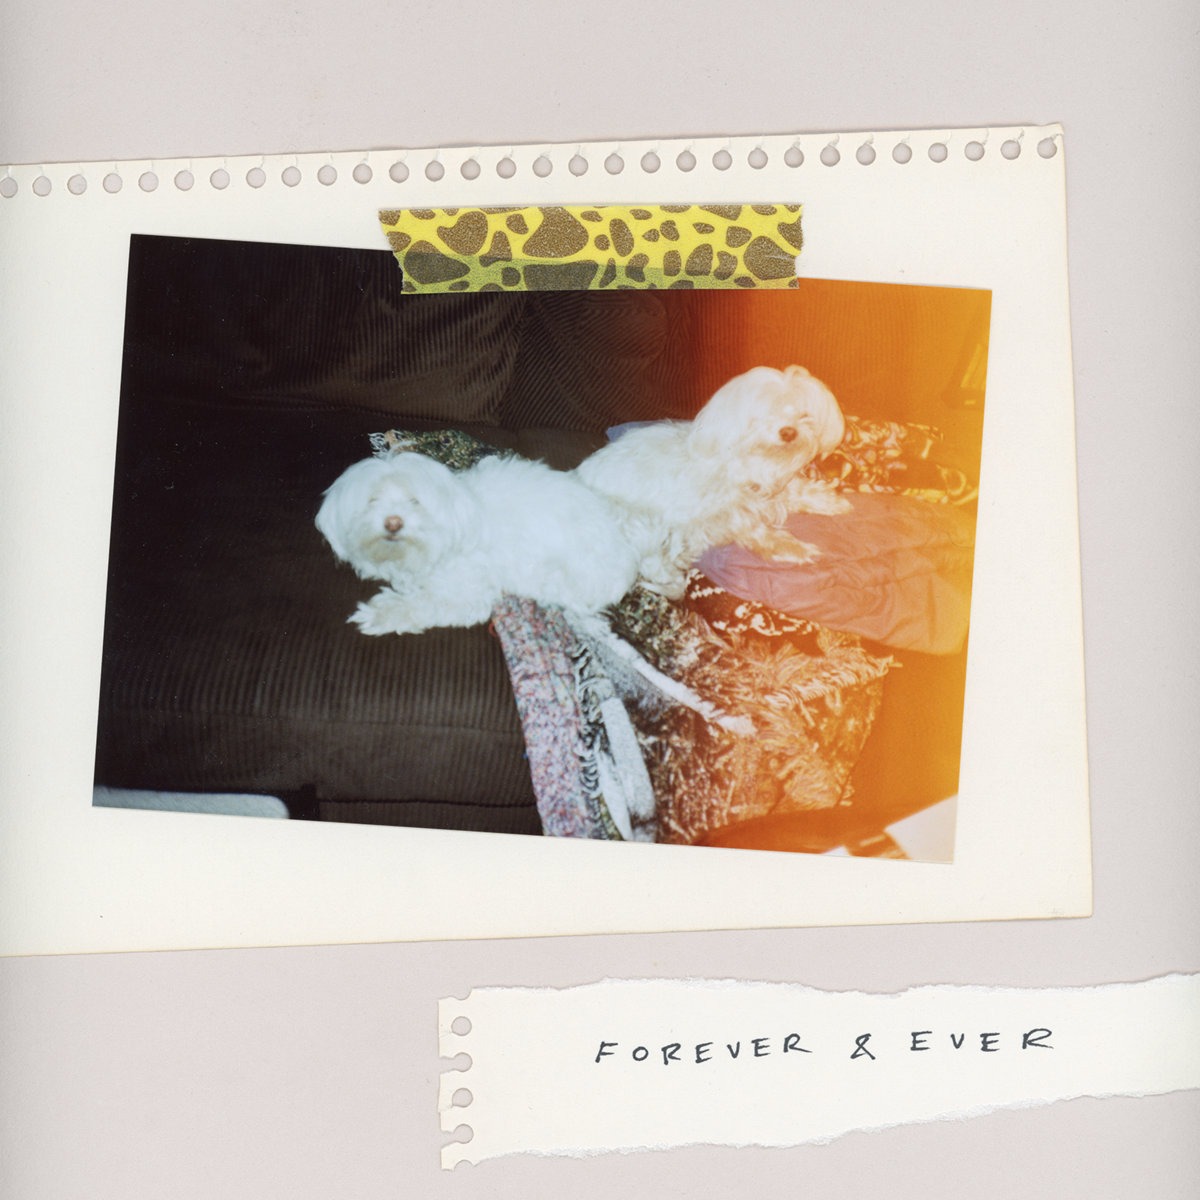 "Forever & Ever," the newest album from SALES, was released July 19, 2018. 